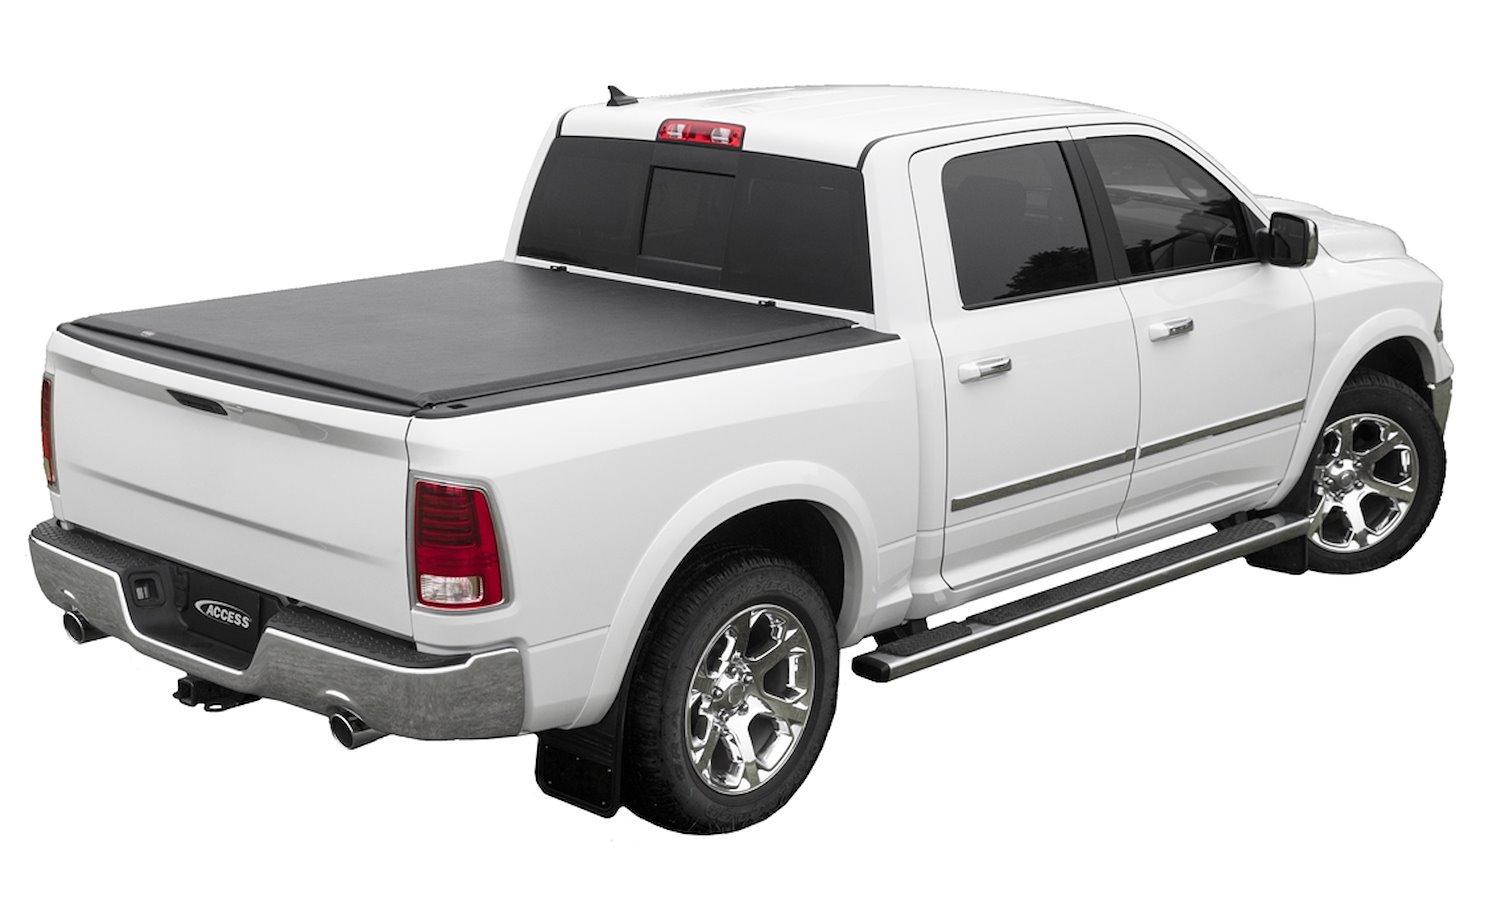 LORADO Roll-Up Tonneau Cover, Fits Select Ram 2500/3500, with 8 ft. Bed